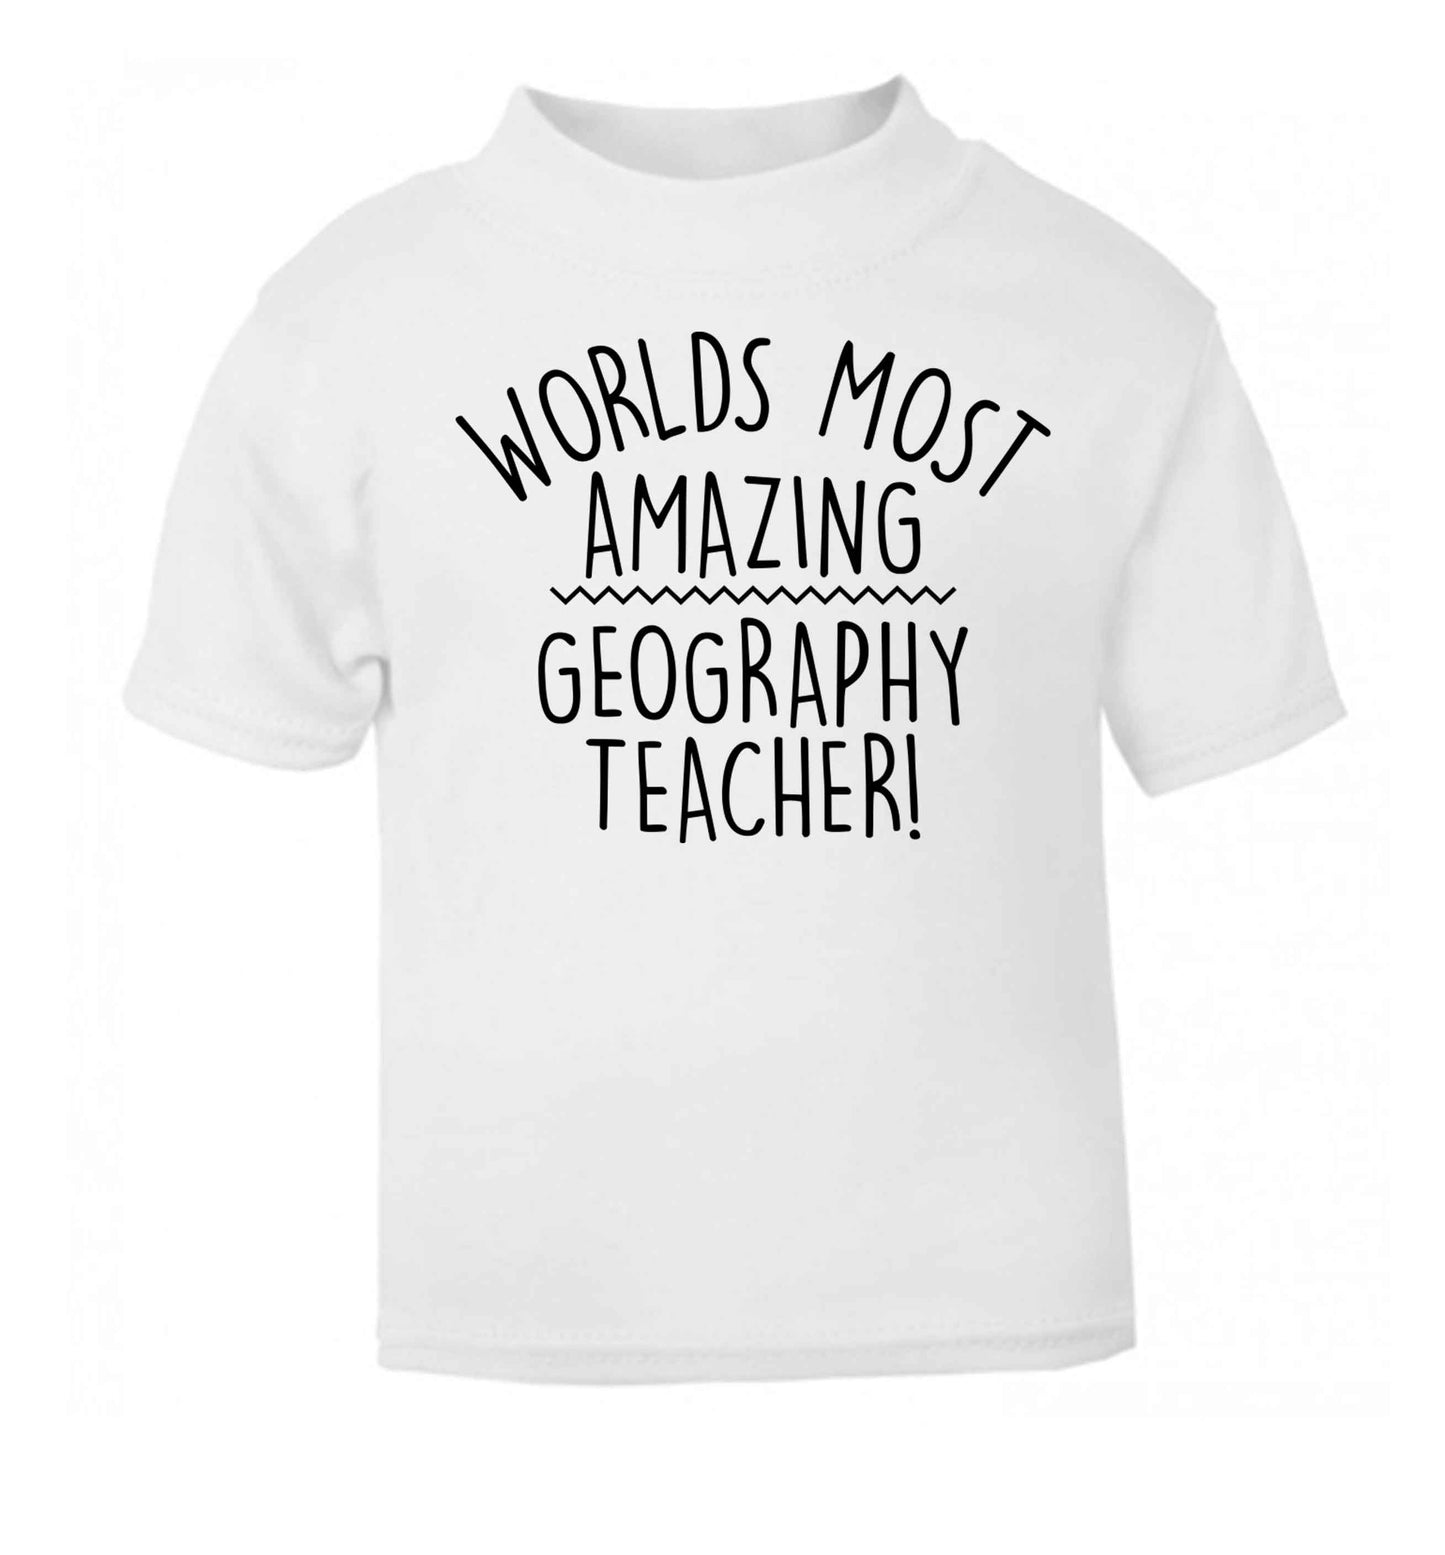 Worlds most amazing geography teacher white baby toddler Tshirt 2 Years